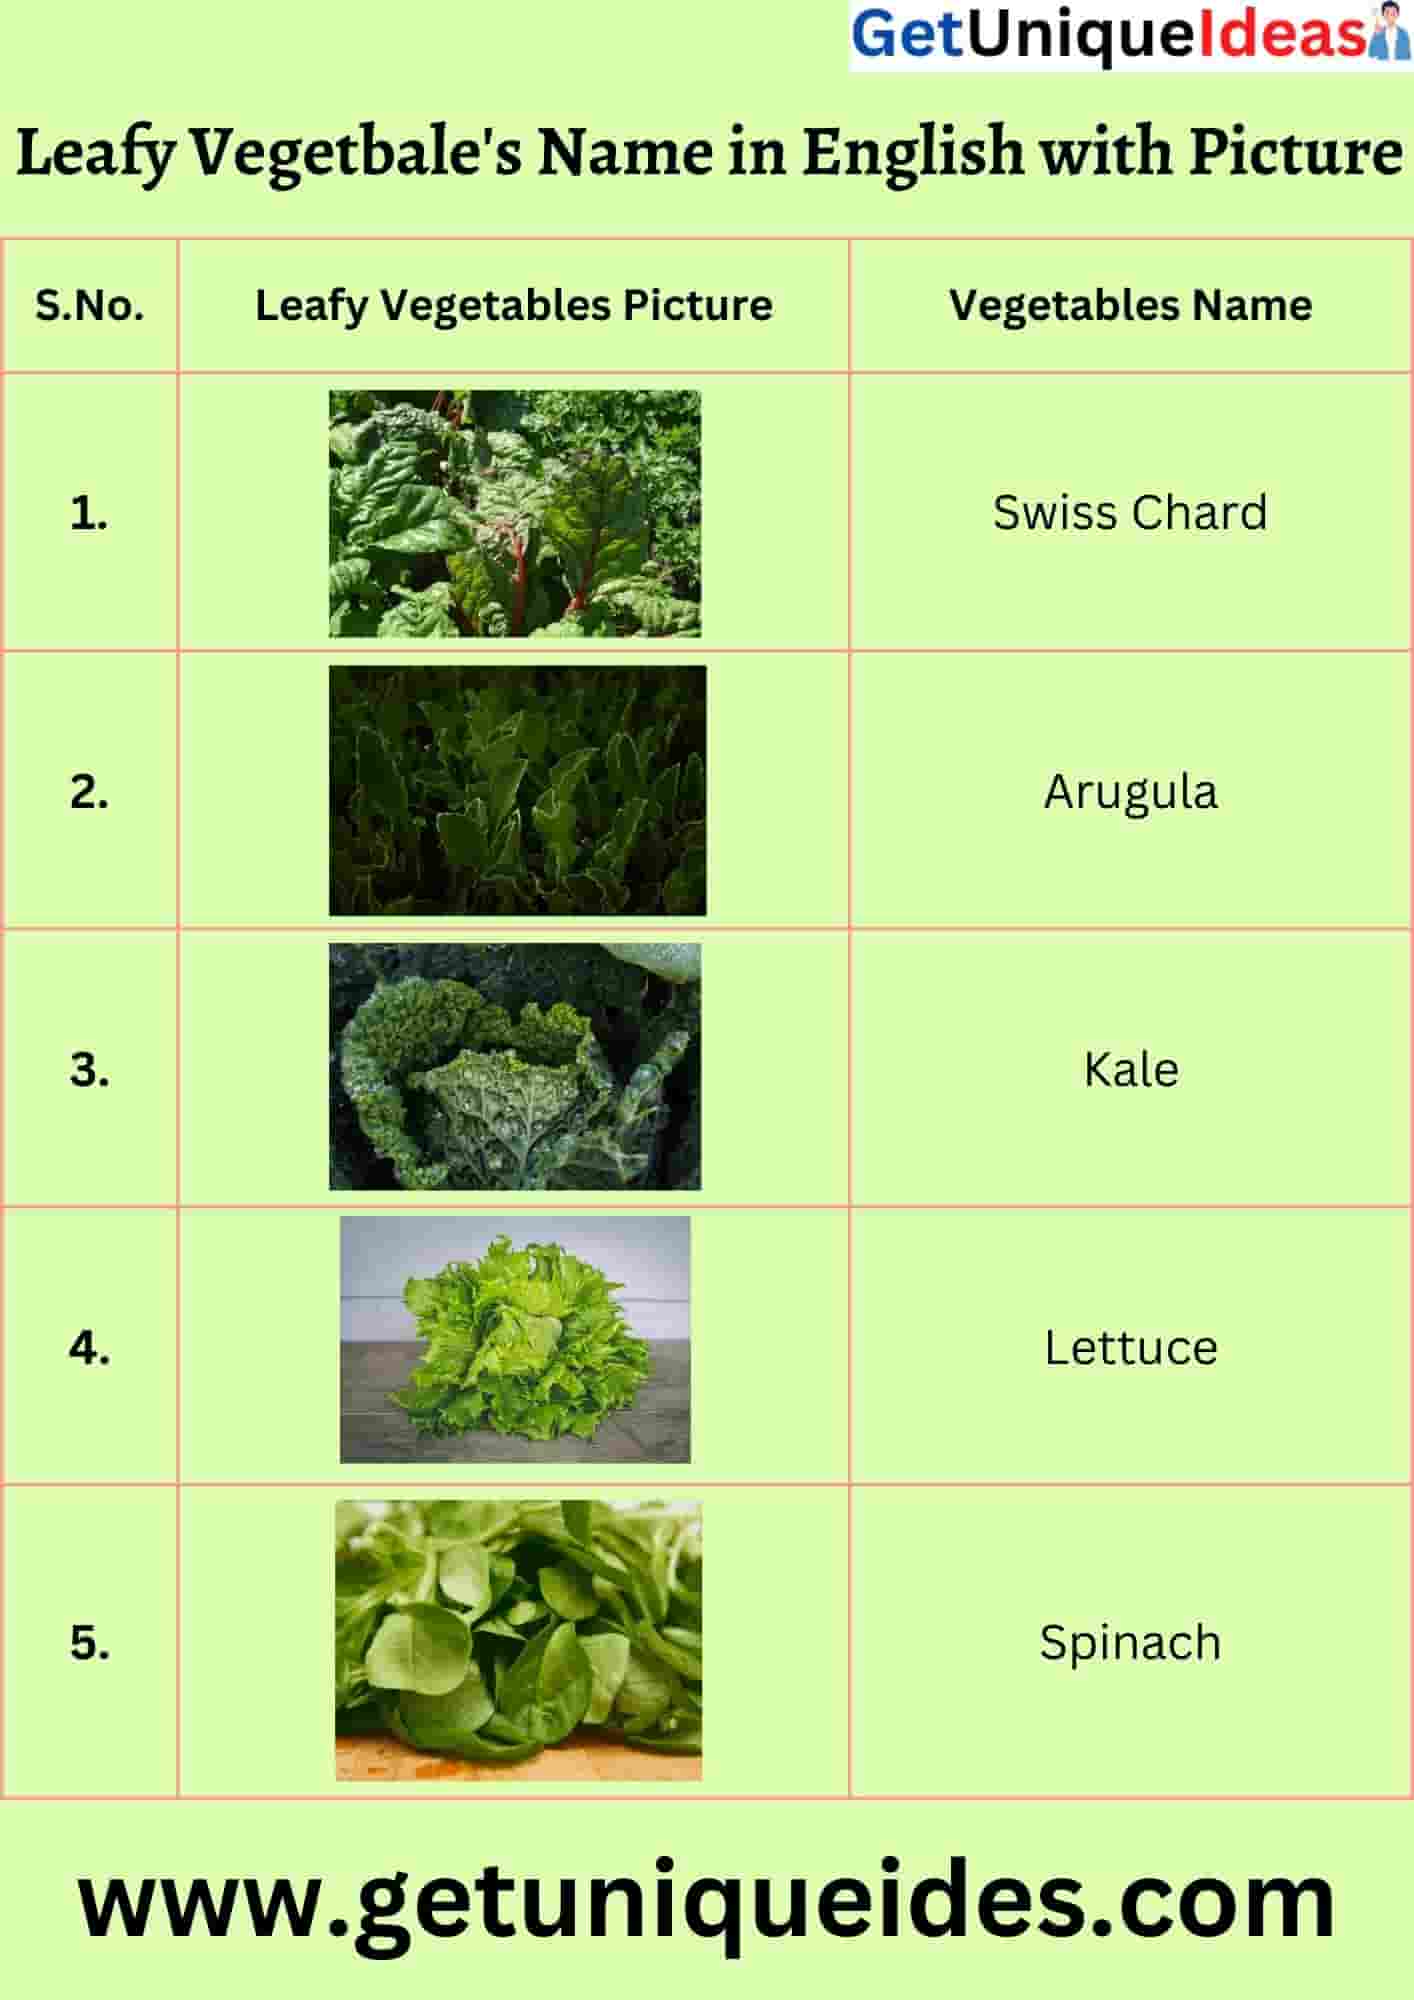 Leafy Vegetables Name in English